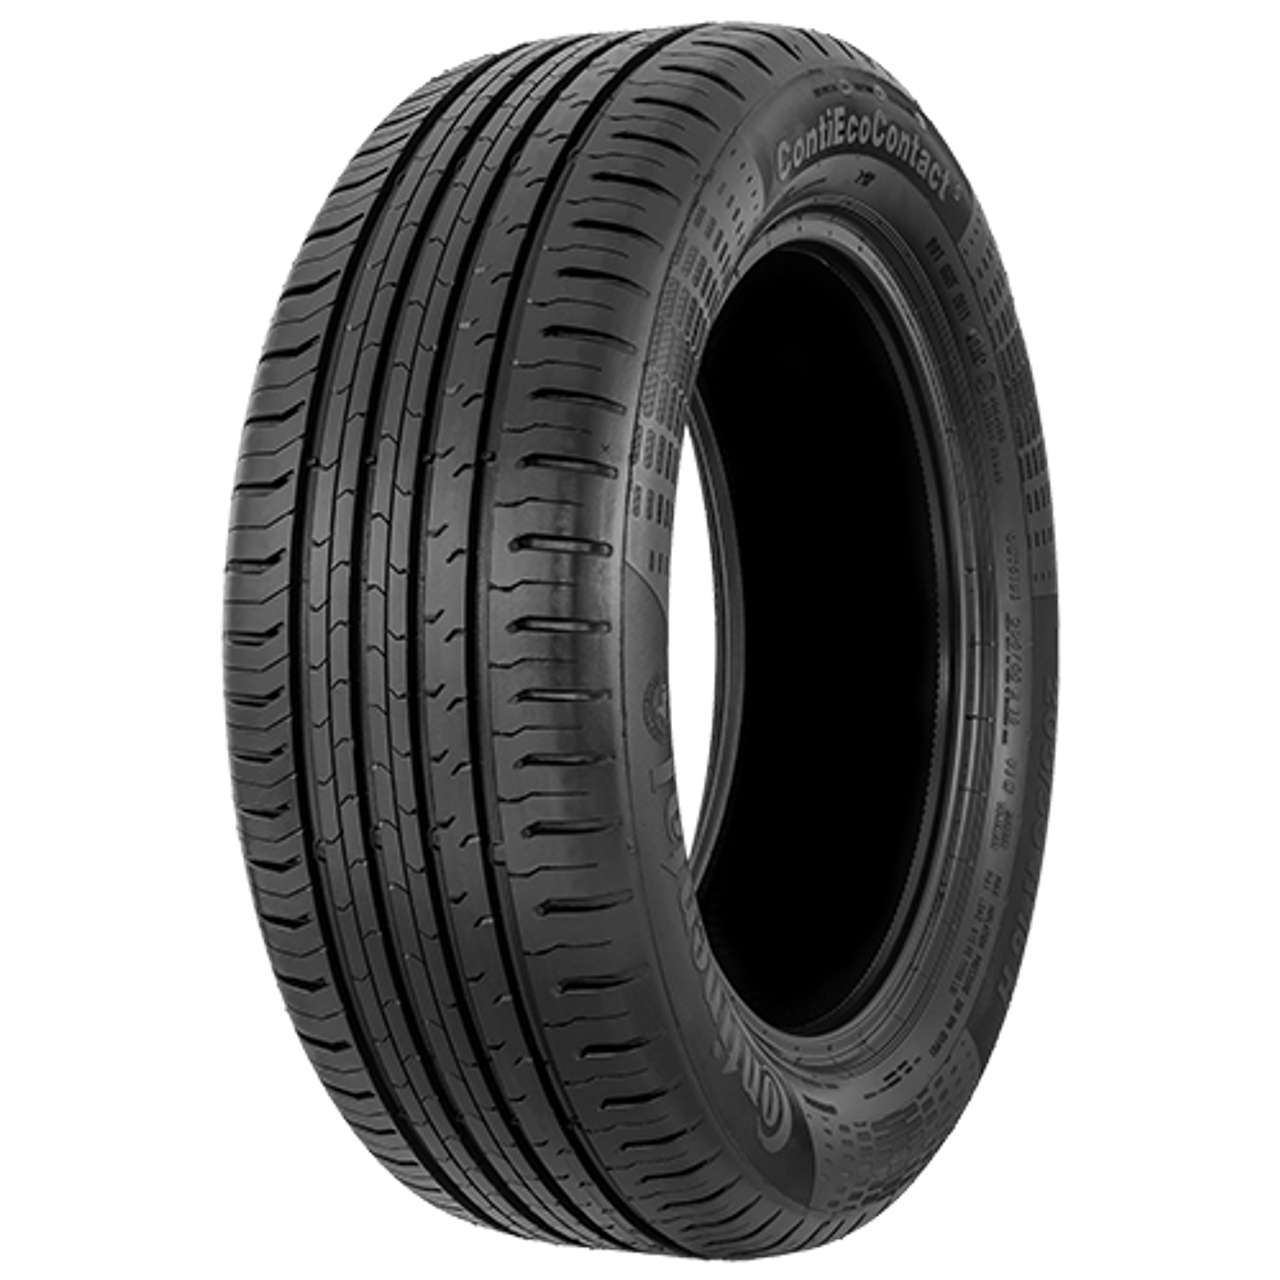 CONTINENTAL CONTIECOCONTACT 5 (TOY) 165/65R14 83T XL